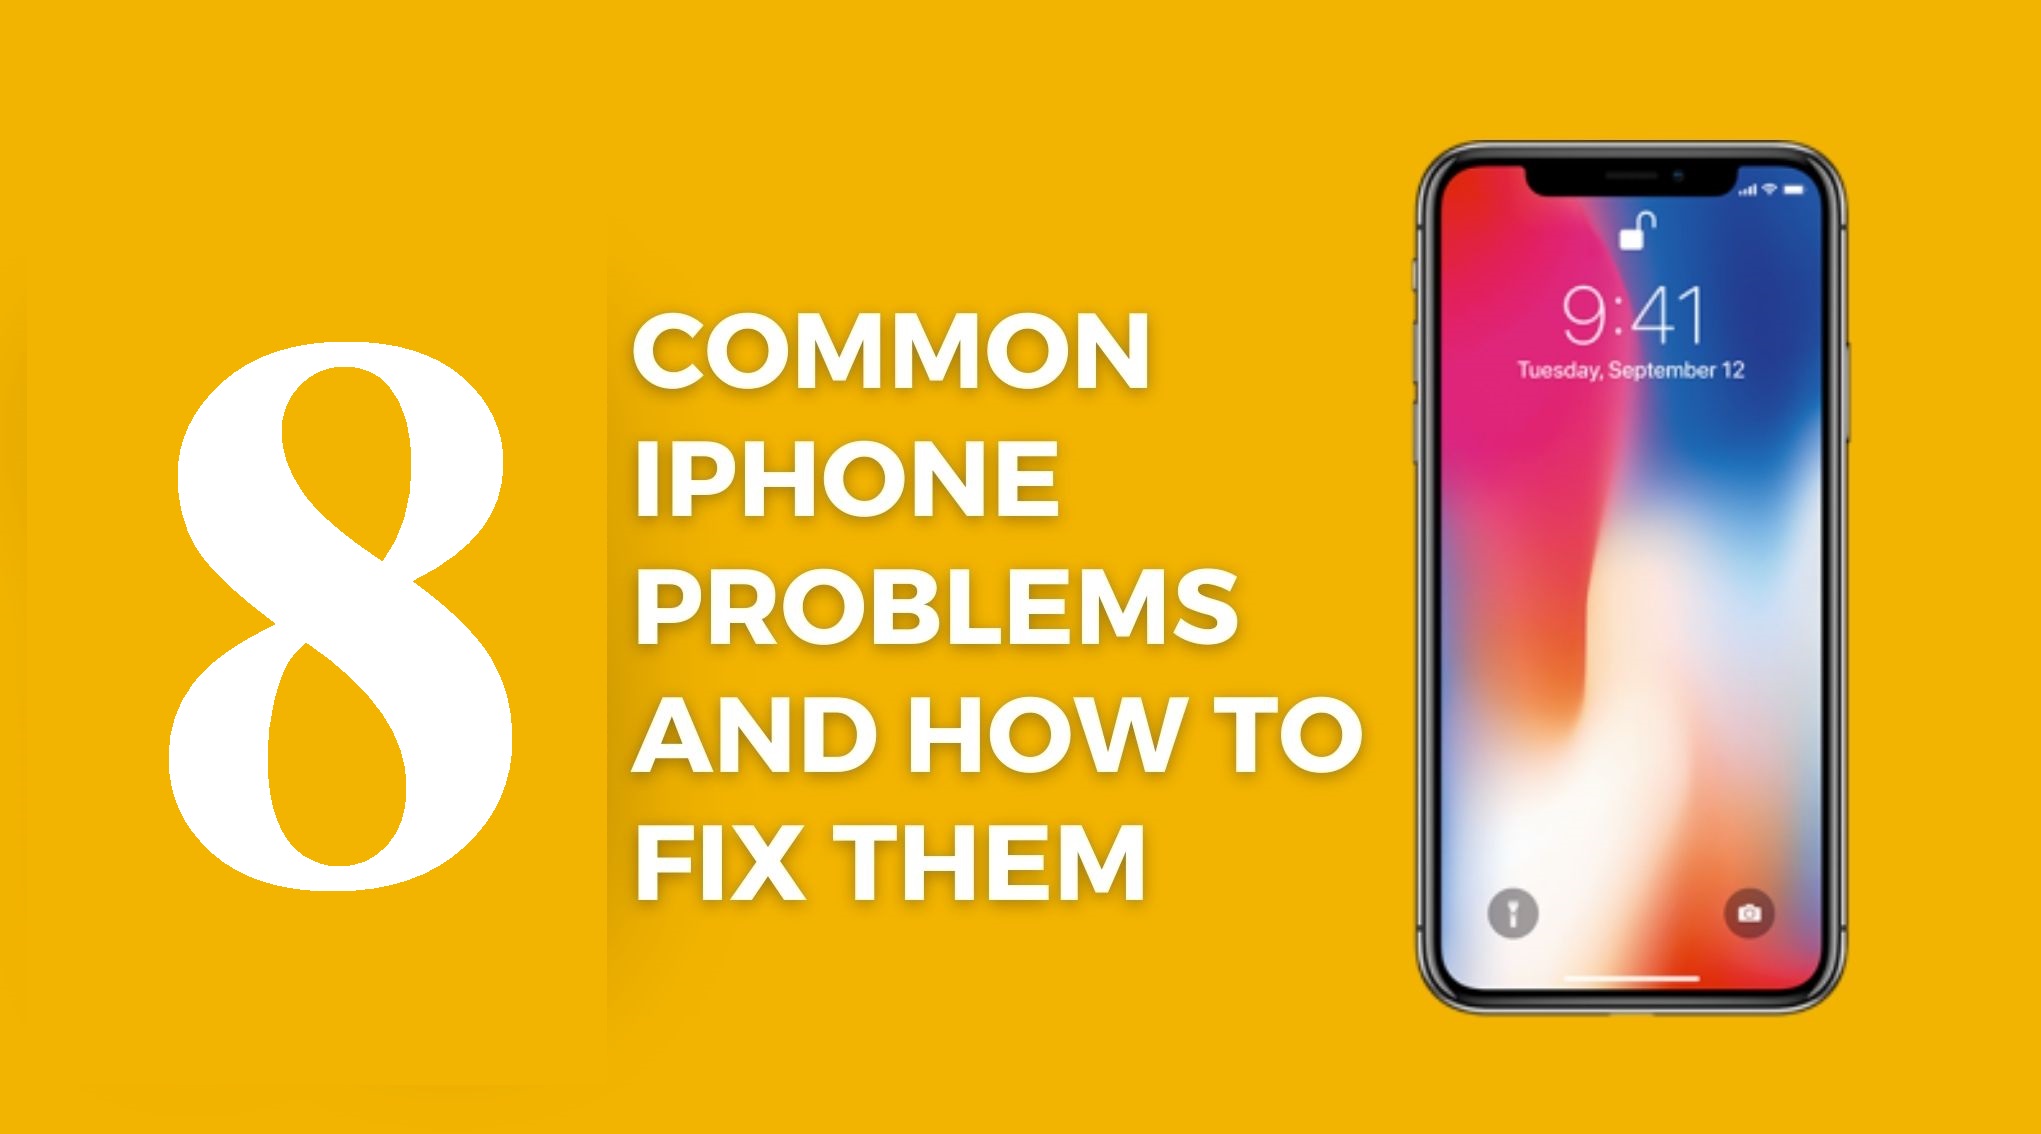 The Top 8 iPhone Common Issues and How to Troubleshoot Them